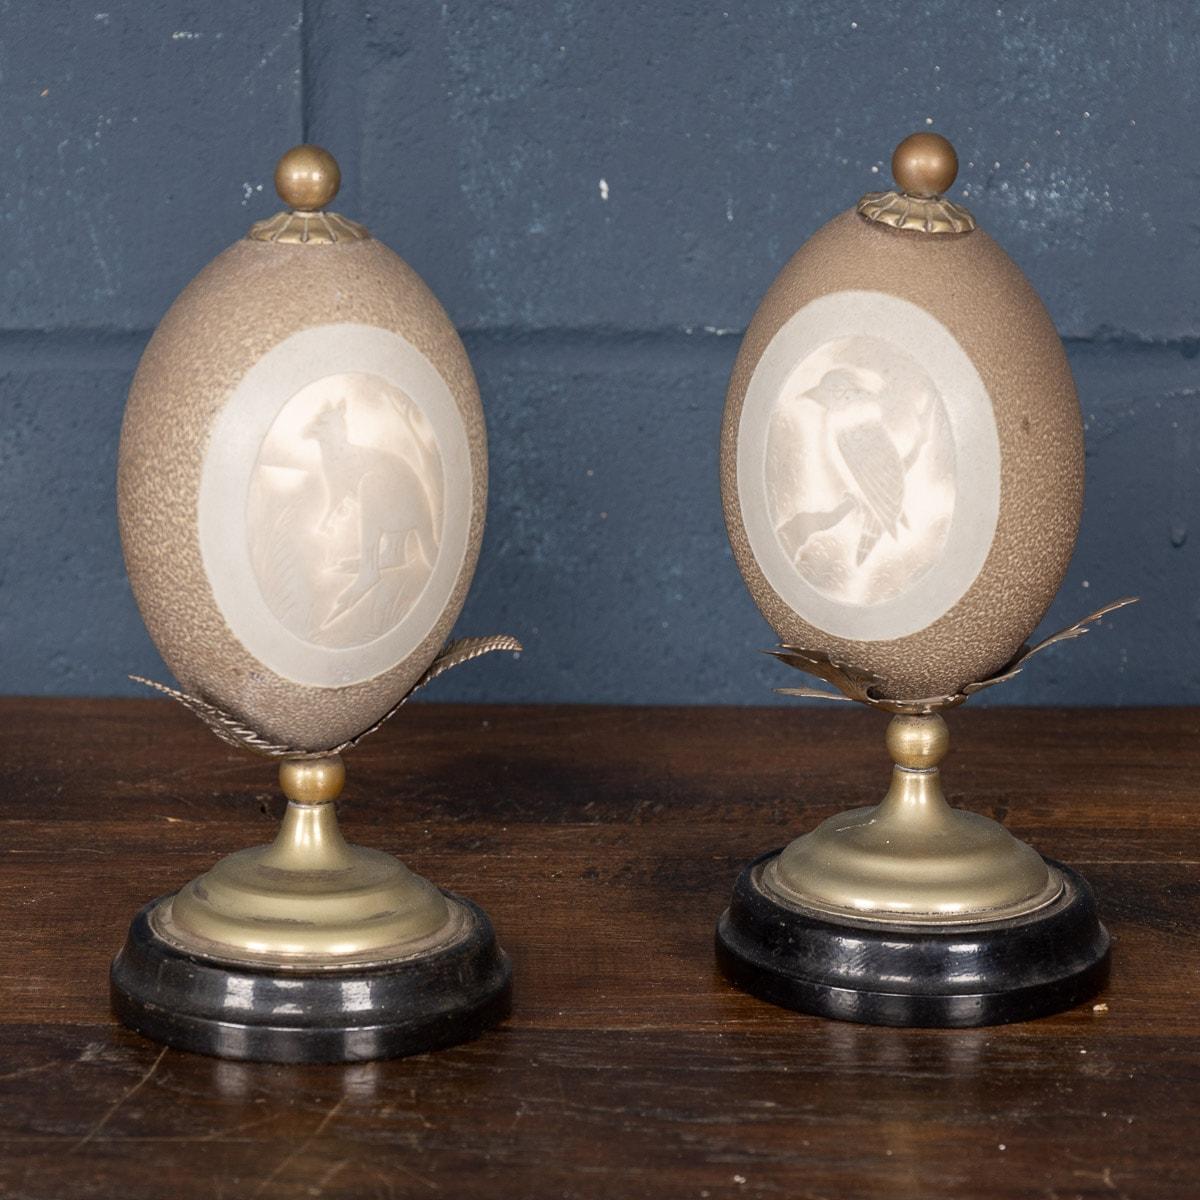 Antique 20th century extremely rare pair of Australian carved emu eggs, mounted on a nickel stand shaped as ferns and an ebonized wood base. These artifacts would have been primarily aimed at the tourist market as souvenirs for visitors and are